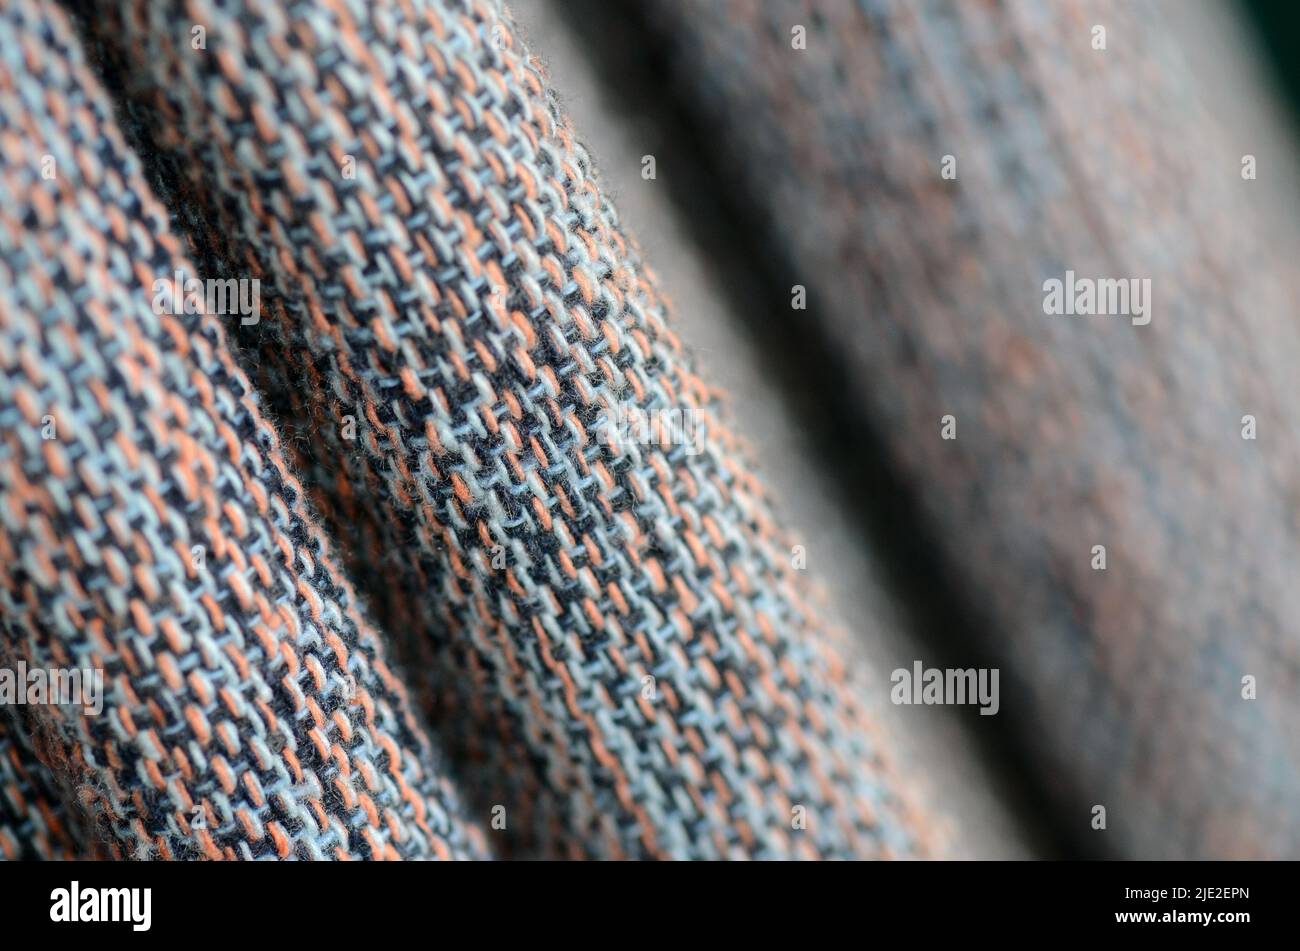 textures and fabrics from an old curtain made of wool Stock Photo